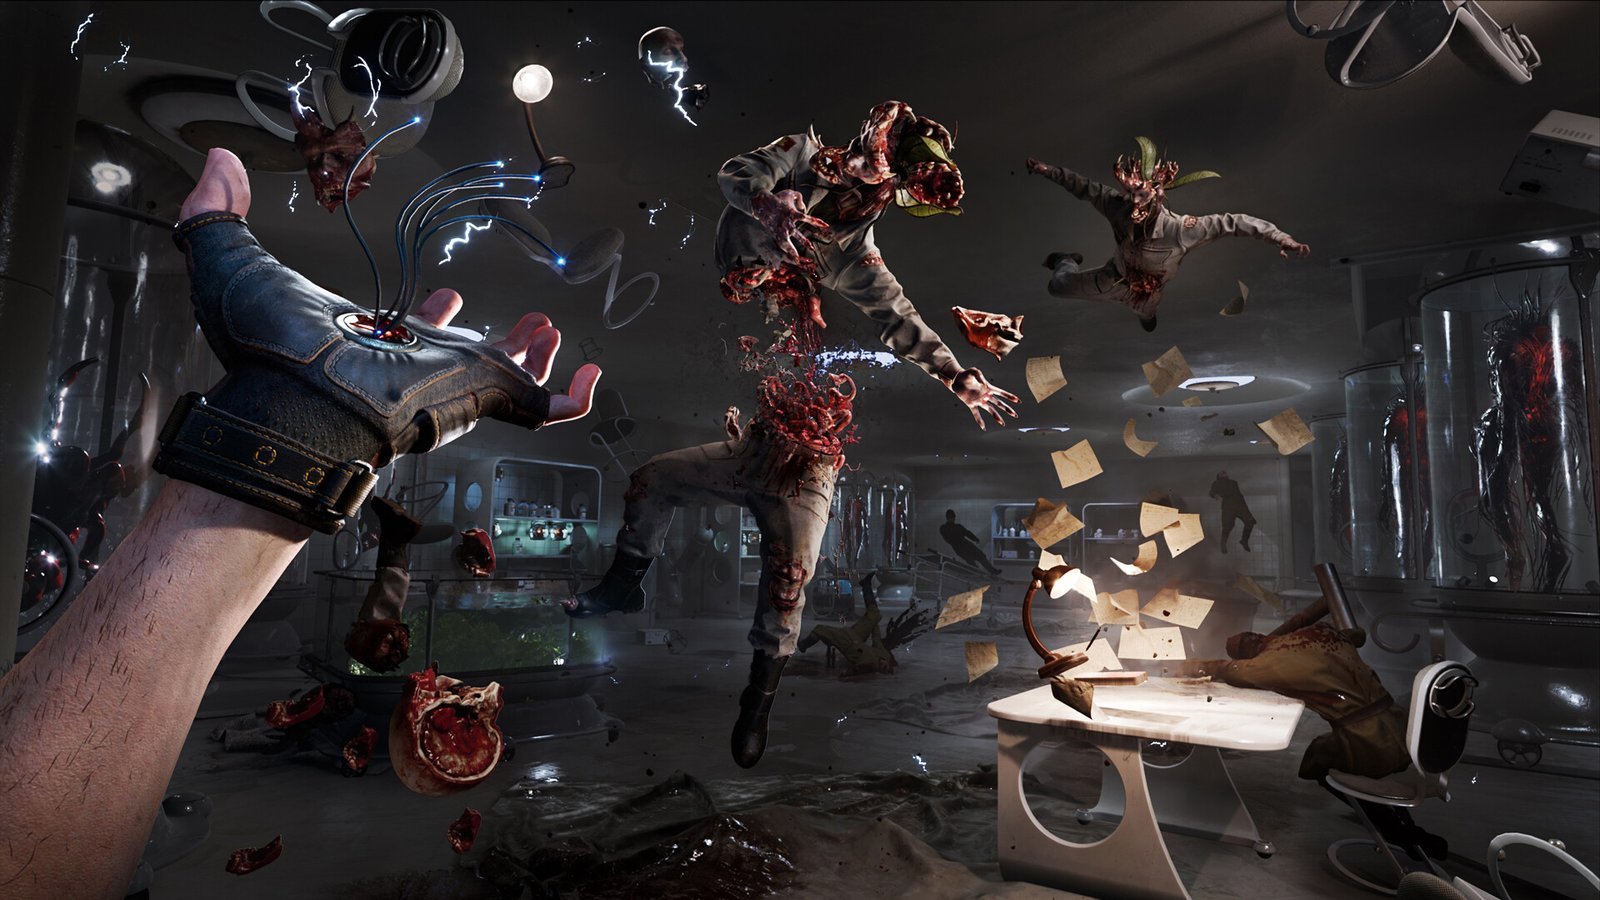 Atomic Heart — a first-person screenshot from Atomic Heart, with the protagonist using telekinesis to lift the disintegrating corpse of a human-plant zombie hybrid.